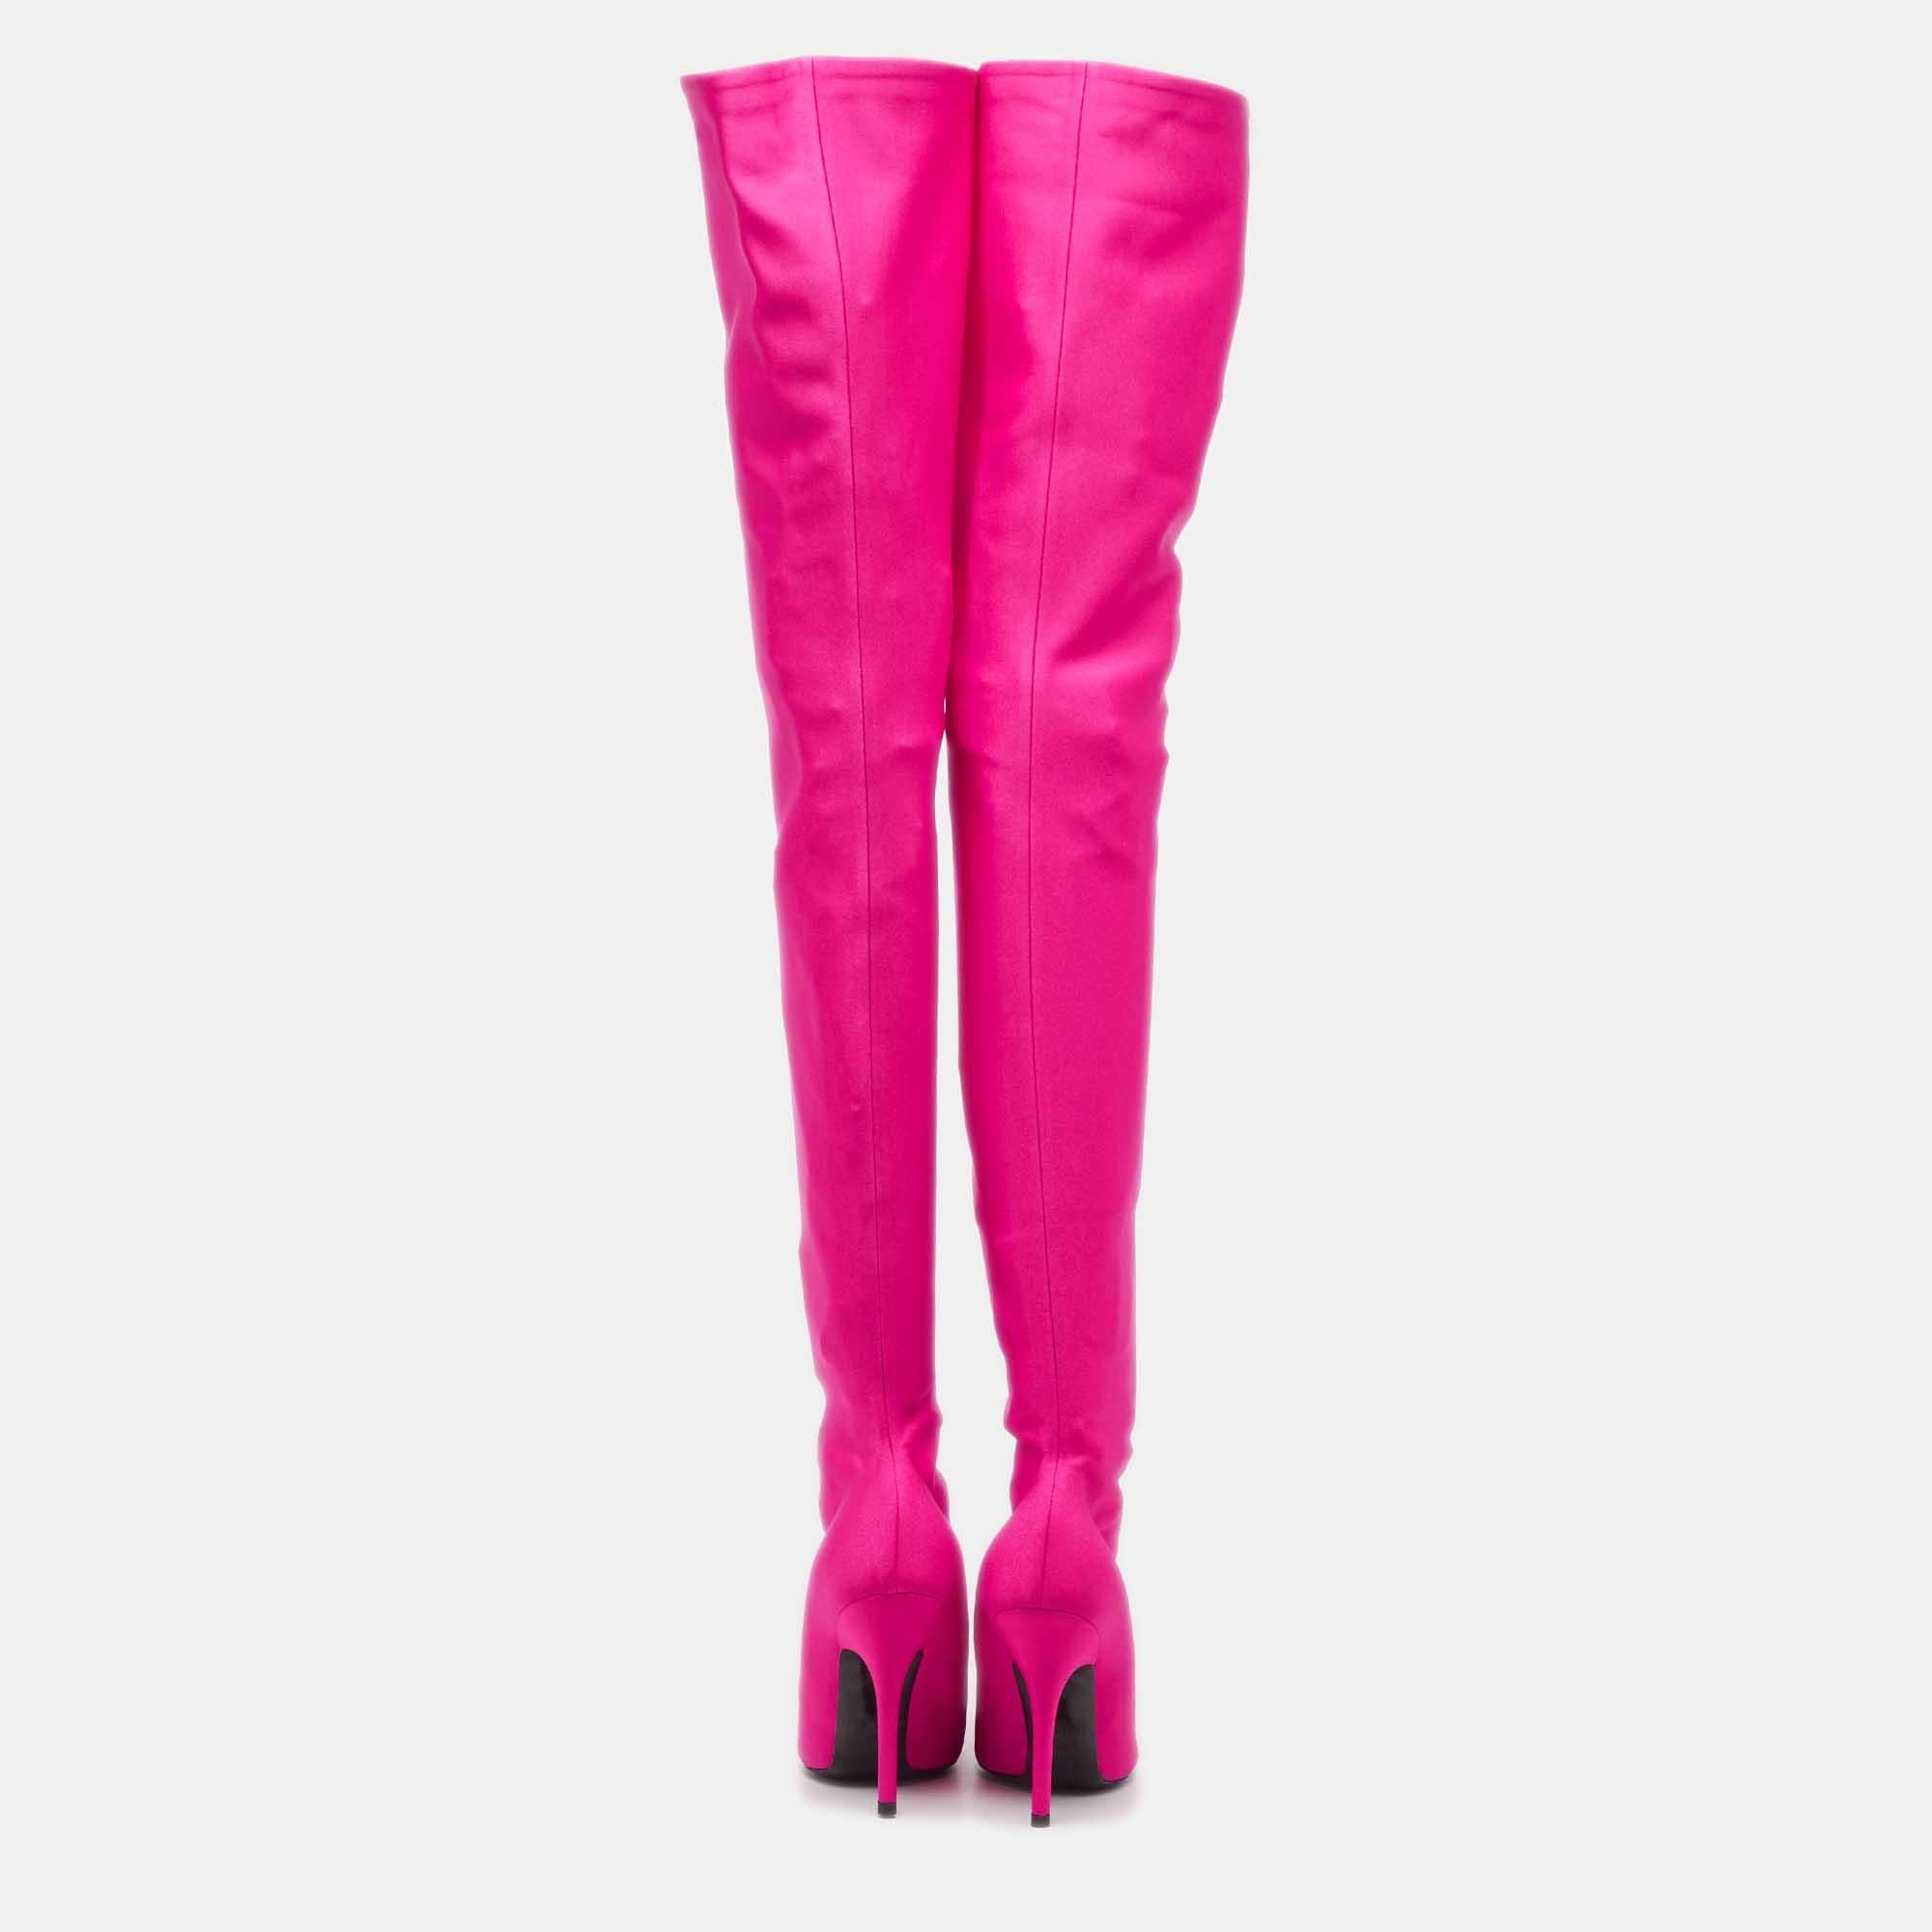 Balenciaga Pink Satin Knife Over The Knee Boots Size 37 For Sale 3